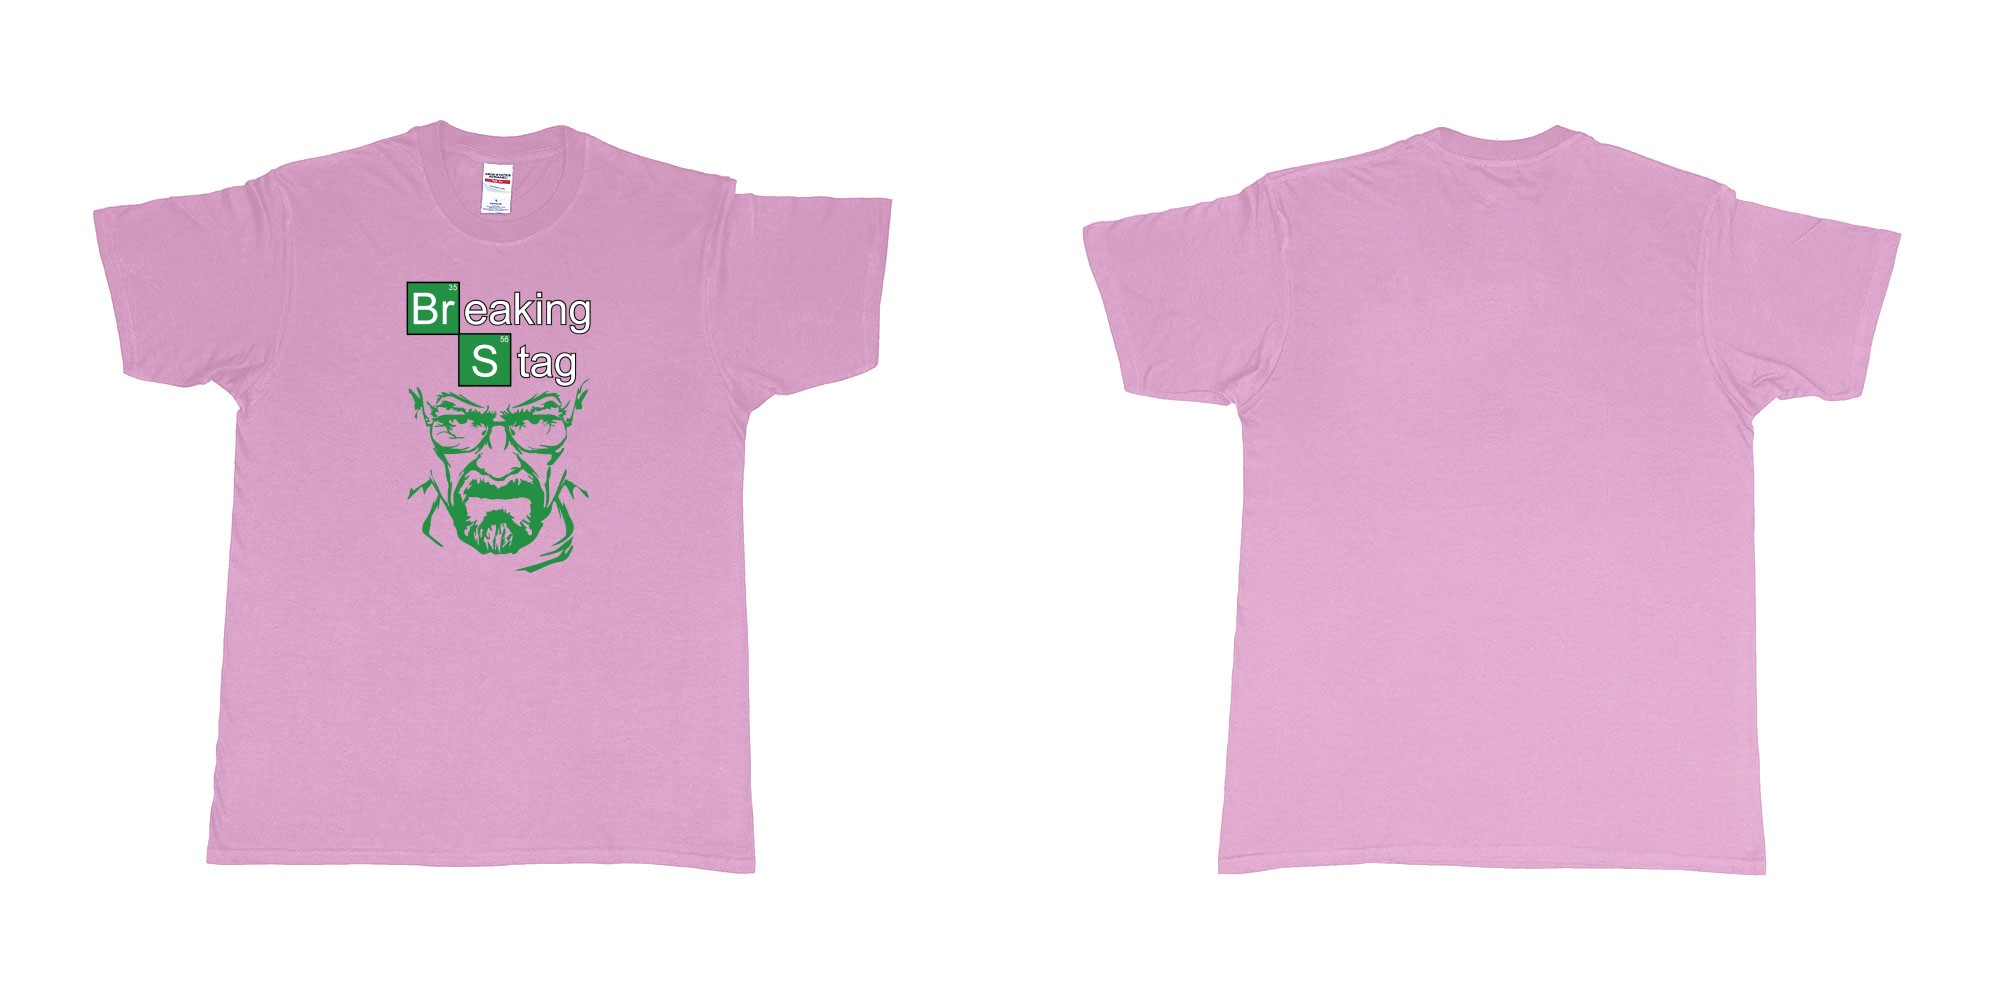 Custom tshirt design TPW Braking Bad Stag in fabric color light-pink choice your own text made in Bali by The Pirate Way